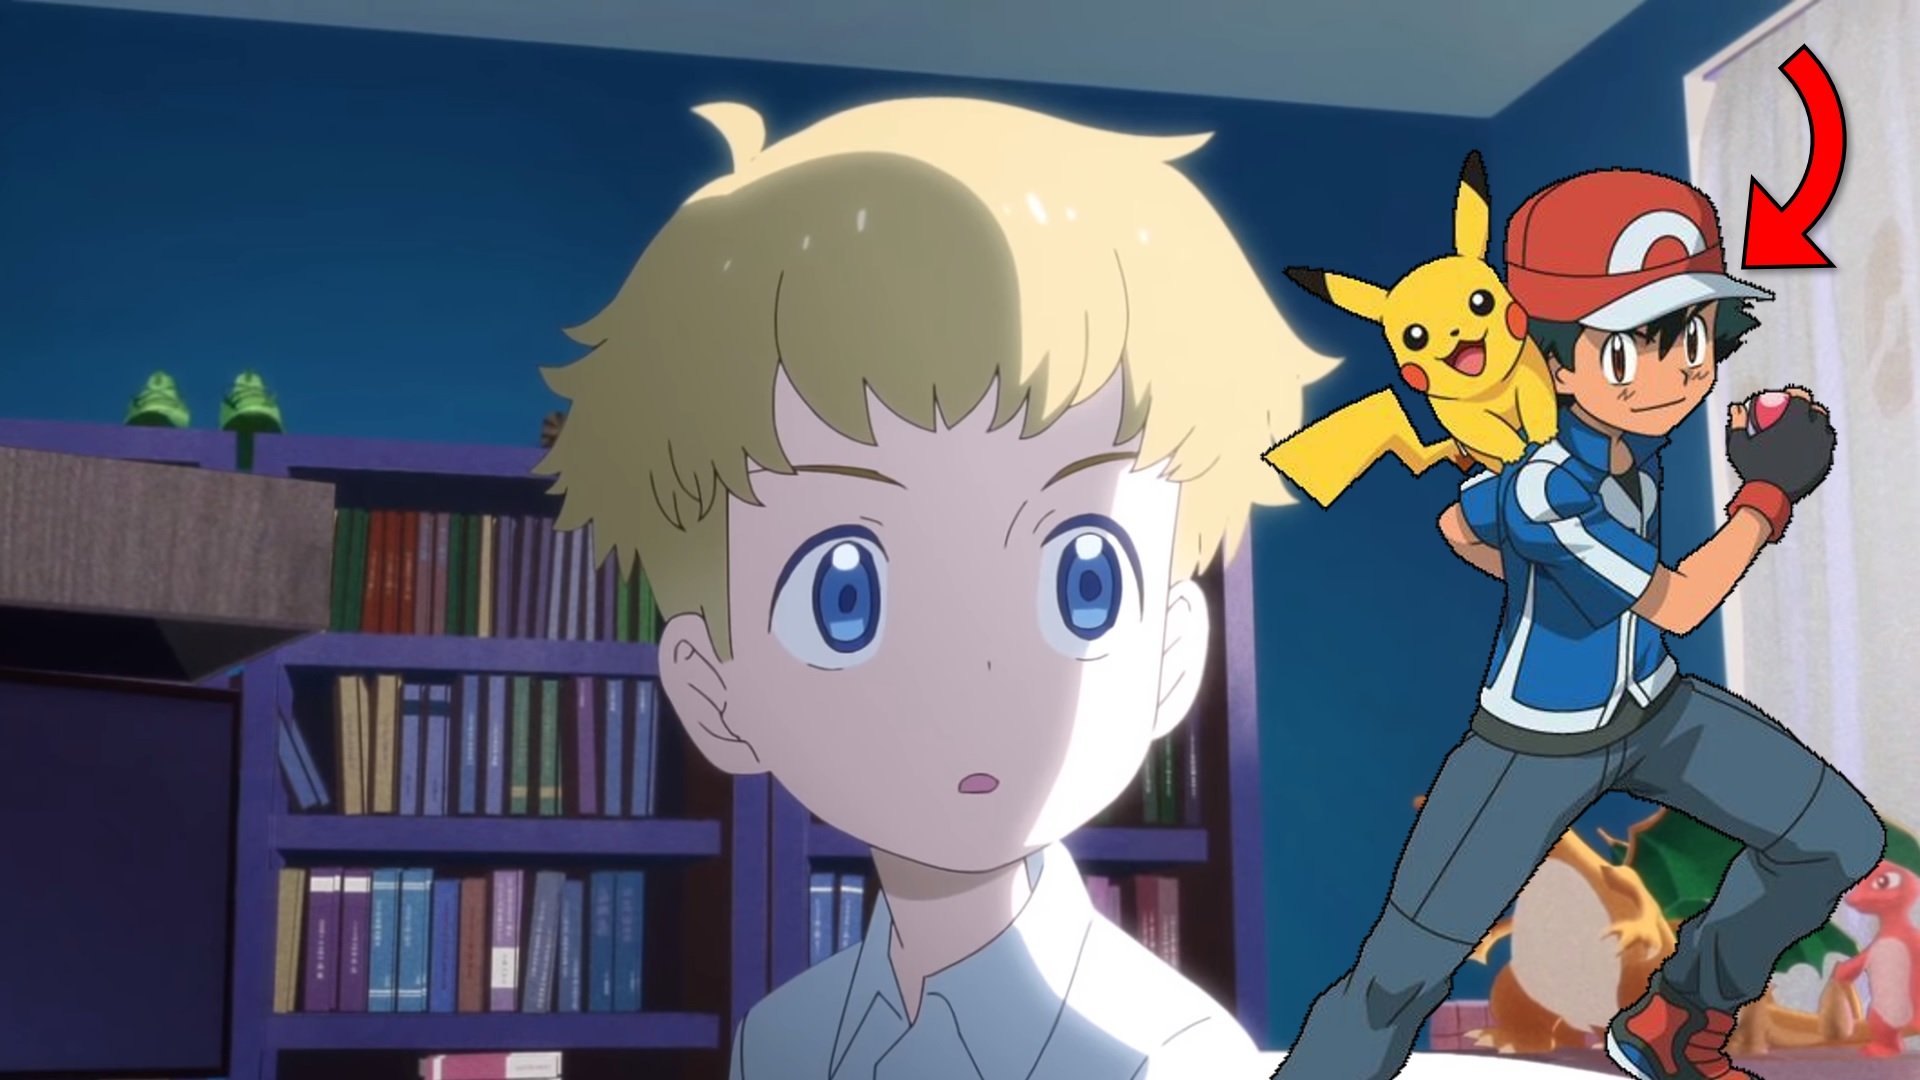 Where to find Ash and Pikachu in Pokémon: Twilight Wings ... - 1920 x 1080 jpeg 299kB